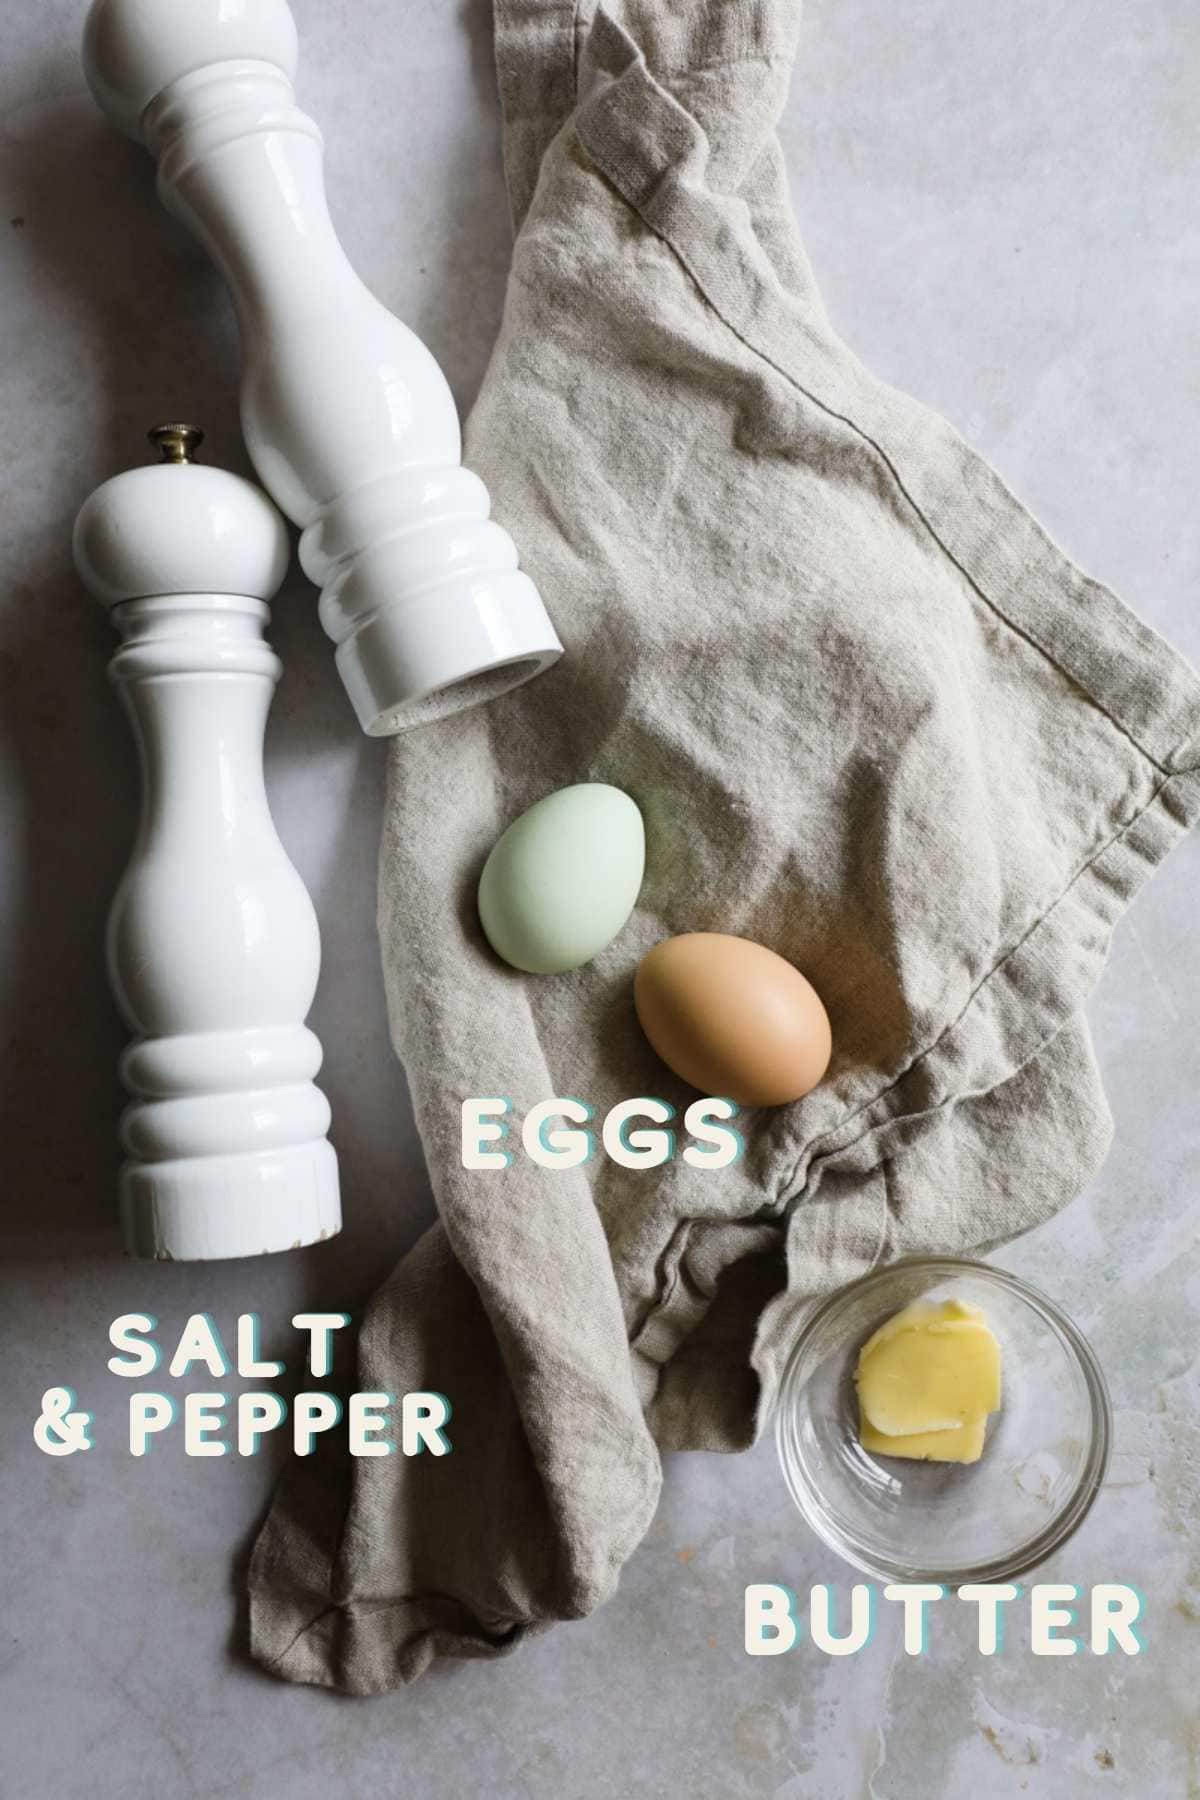 Ingredients to fry eggs in 4 easy ways, including butter, eggs, and salt and pepper.